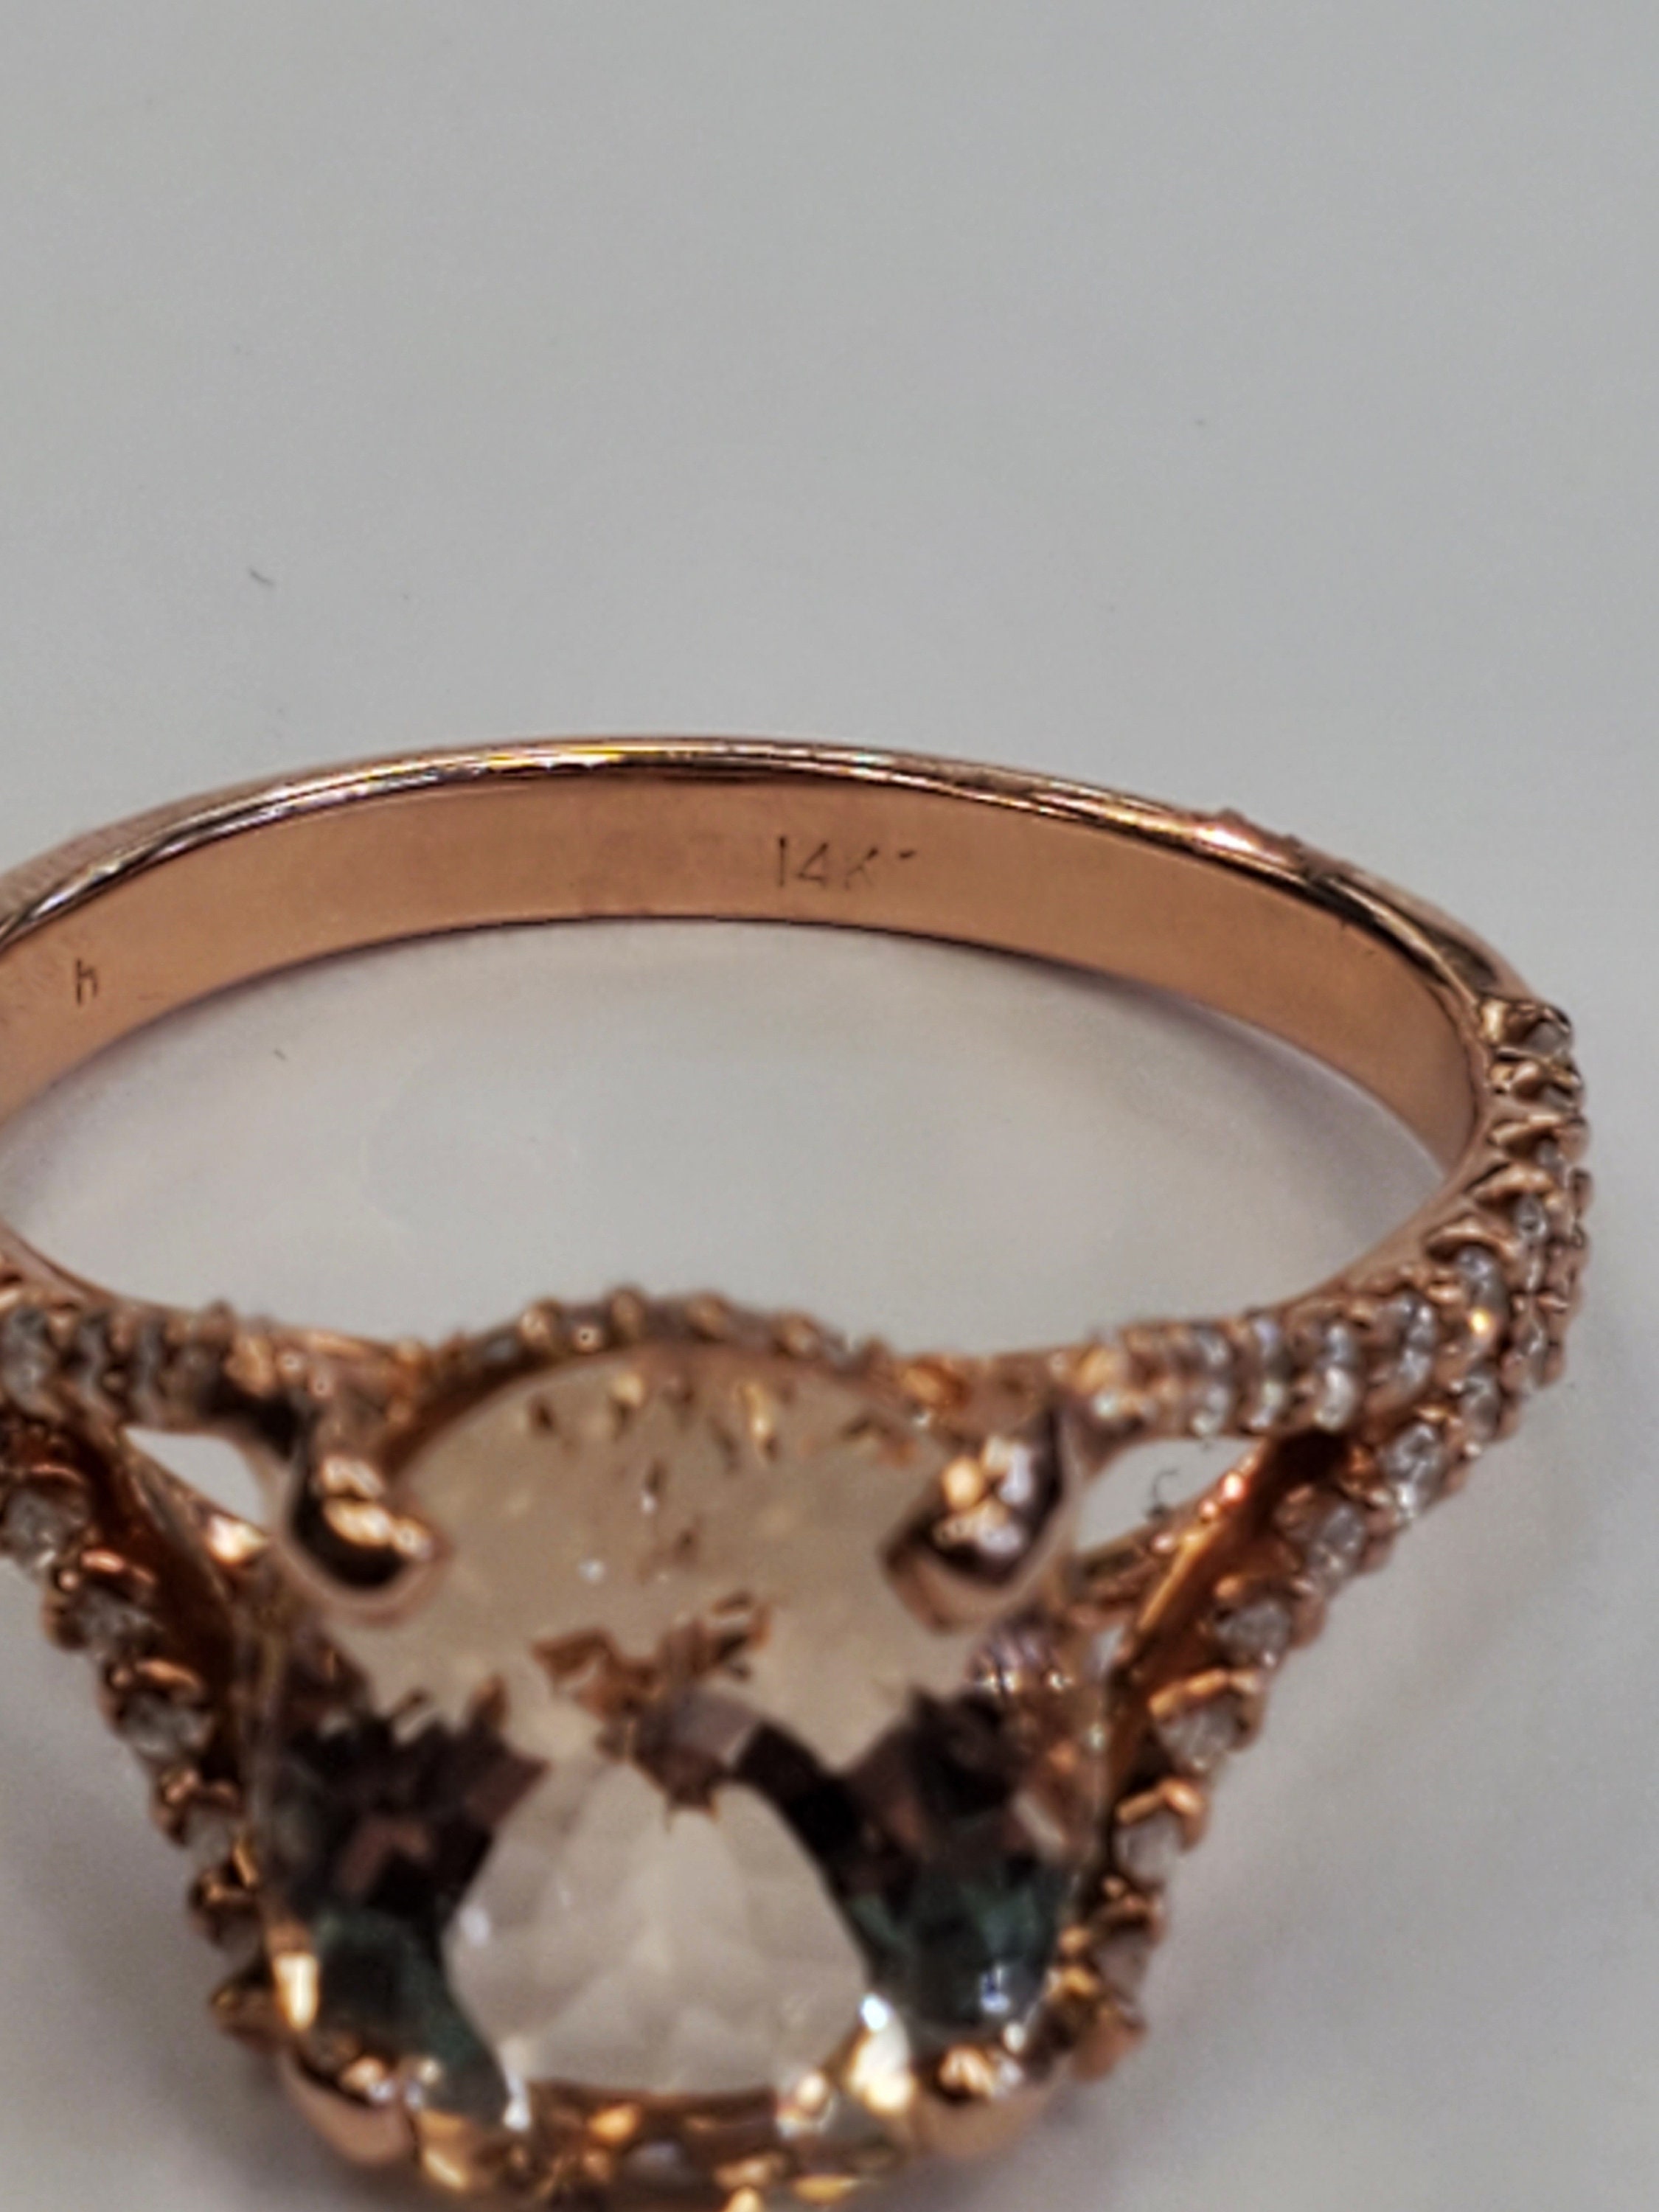 Product Image for 14k Rose Gold 2.50ct Morganite Oval Split Shank Ring with Diamonds size 7.5